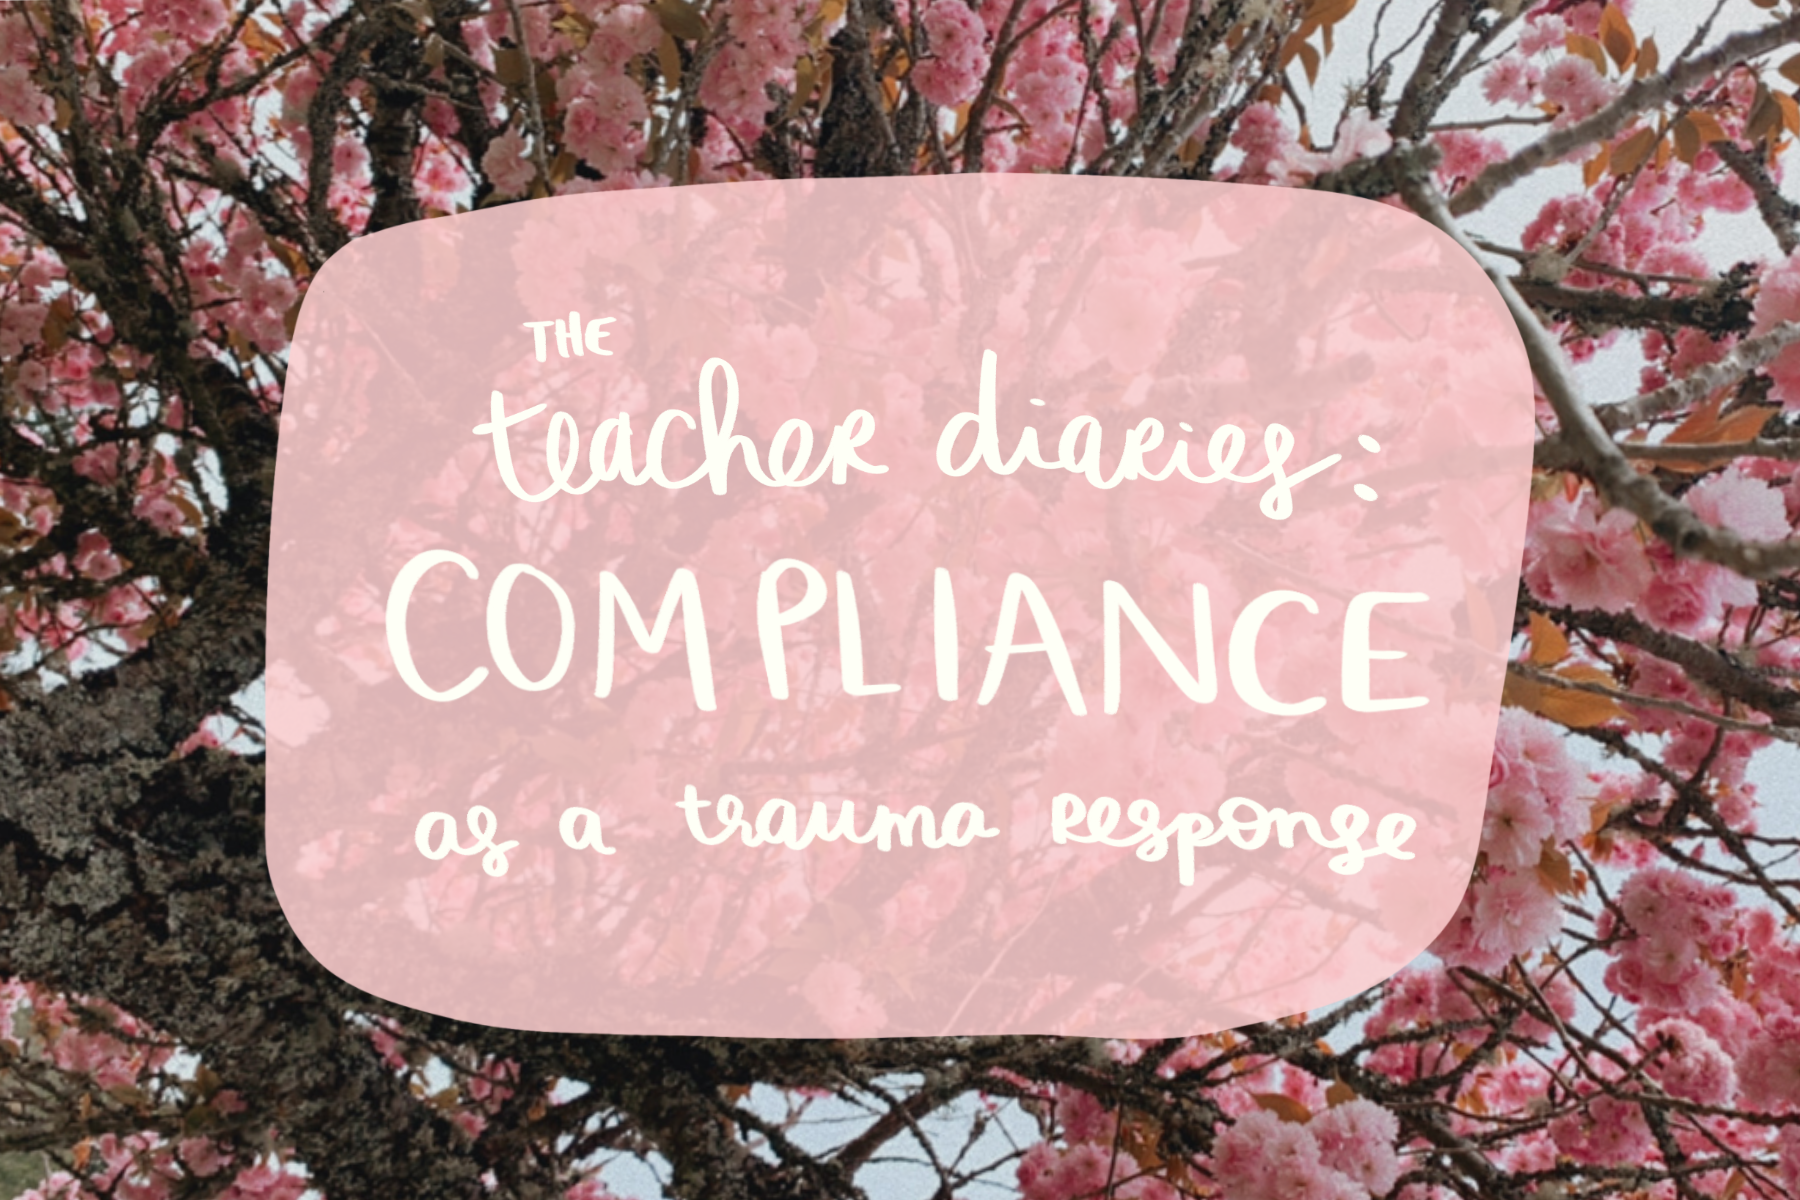 Teacher Diaries: Part of the "advocacy edit" on Teacher Dress Code discussing teacher trauma, whistleblowing in education, and special education rights and laws.